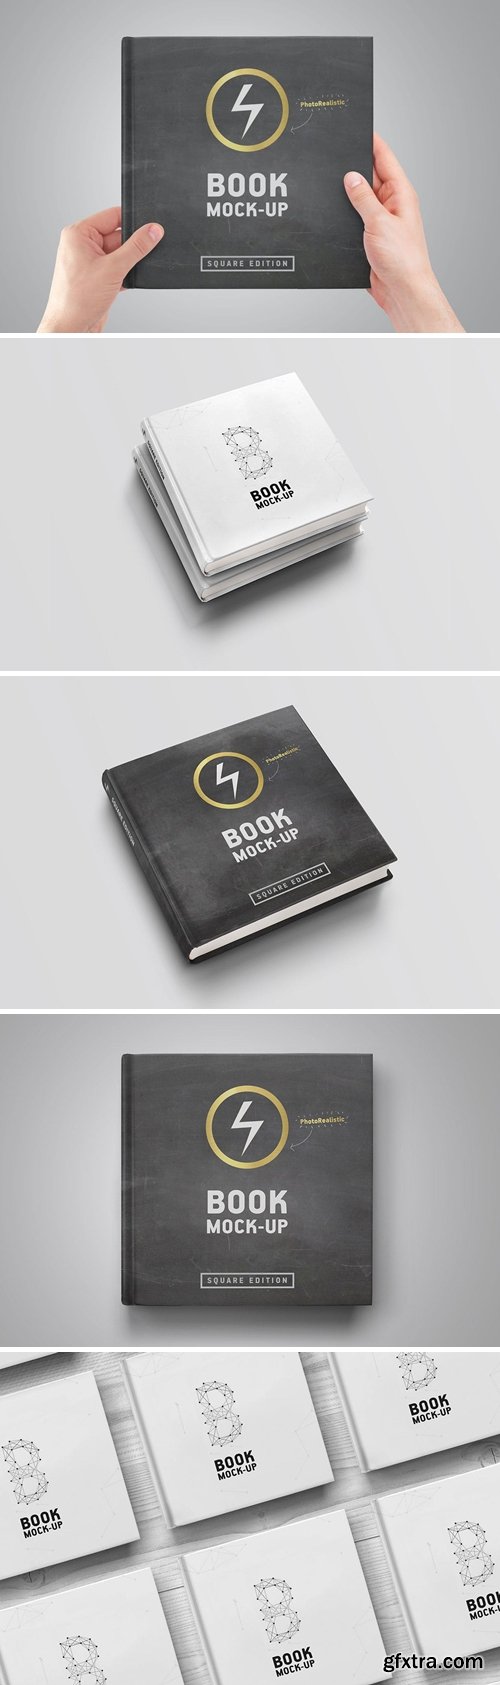 Square Book Mock-Up